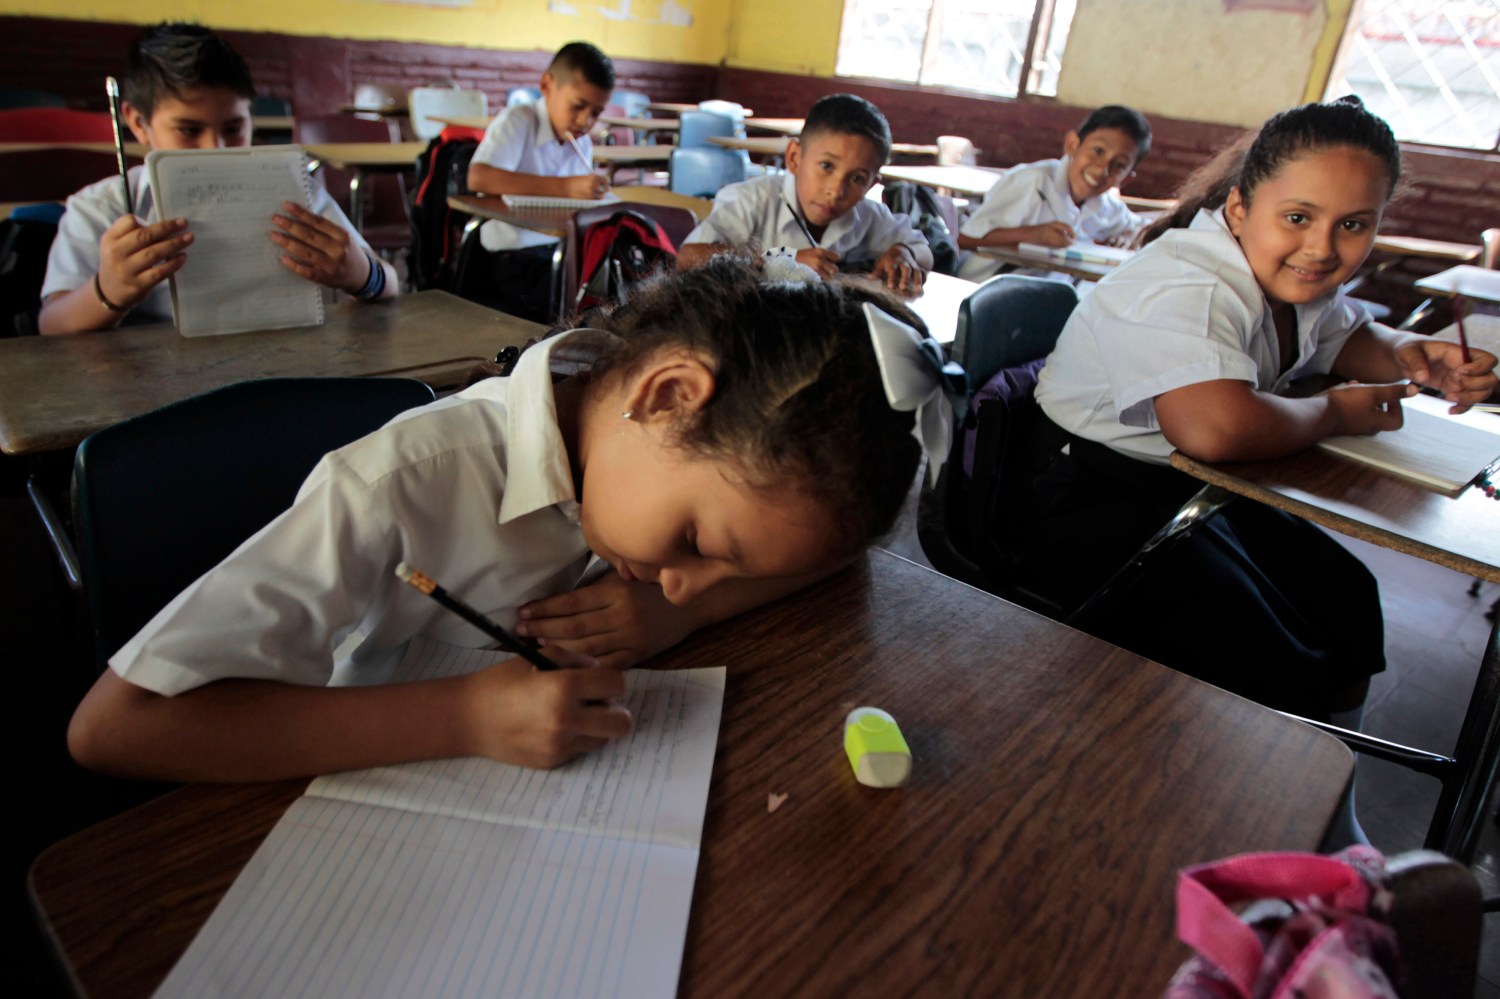 A student writes down in her note book on the first day of school in Managua February 11, 2013. Around 1.6 million students are expected to start their new academic year, according to the Ministry of Education of Nicaragua.  REUTERS/Oswaldo Rivas (NICARAGUA - Tags: EDUCATION) - GM1E92C0D4D01